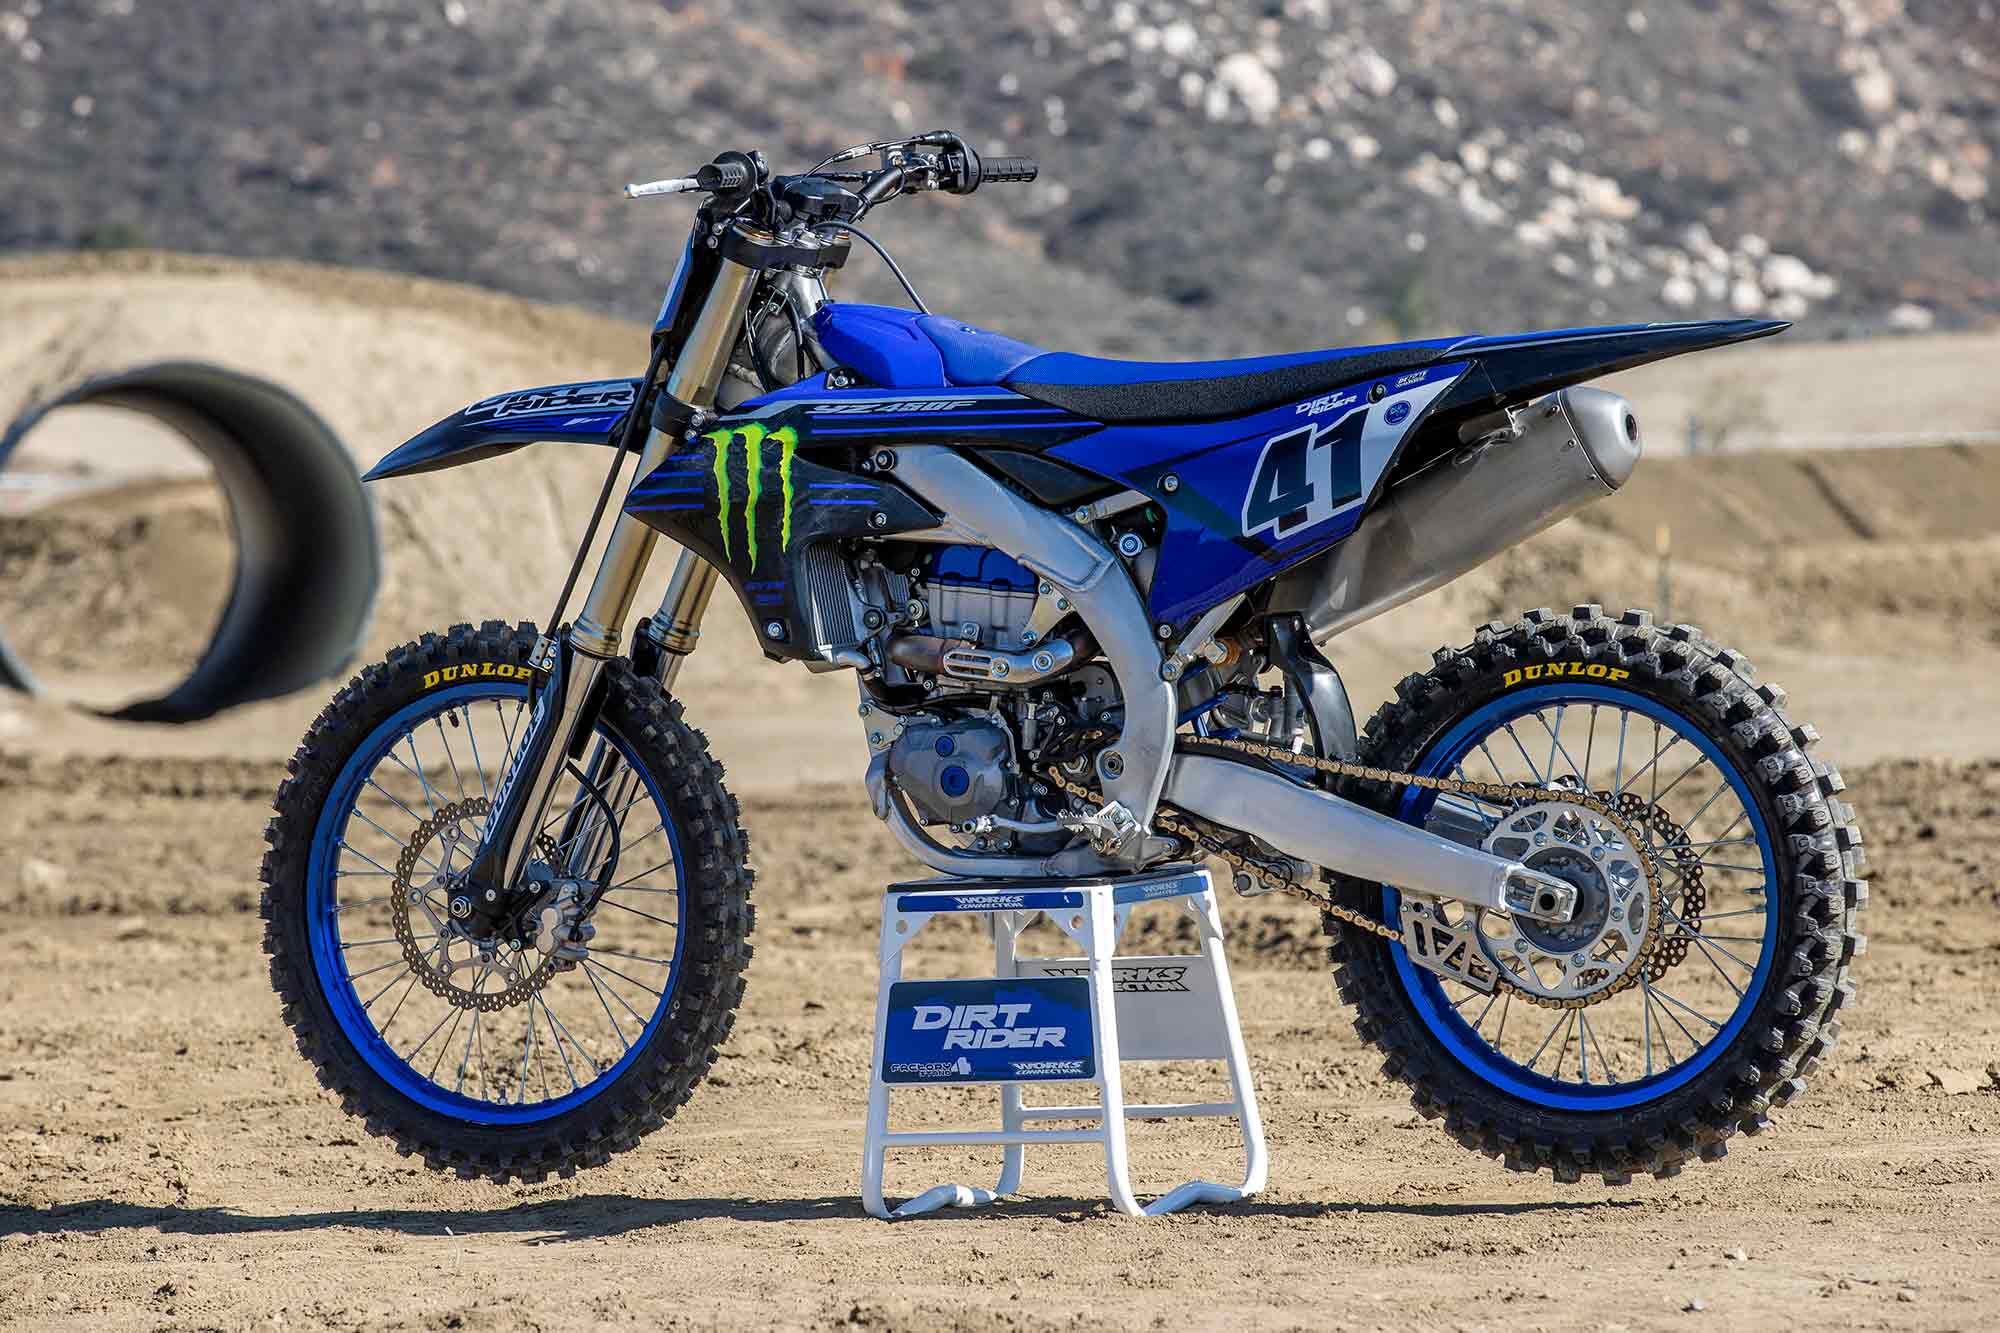 The bLU cRU shed 5 pounds from its flagship motocrosser. On Dirt Rider’s automotive scales, the YZ450F weighs 242 pounds wet.